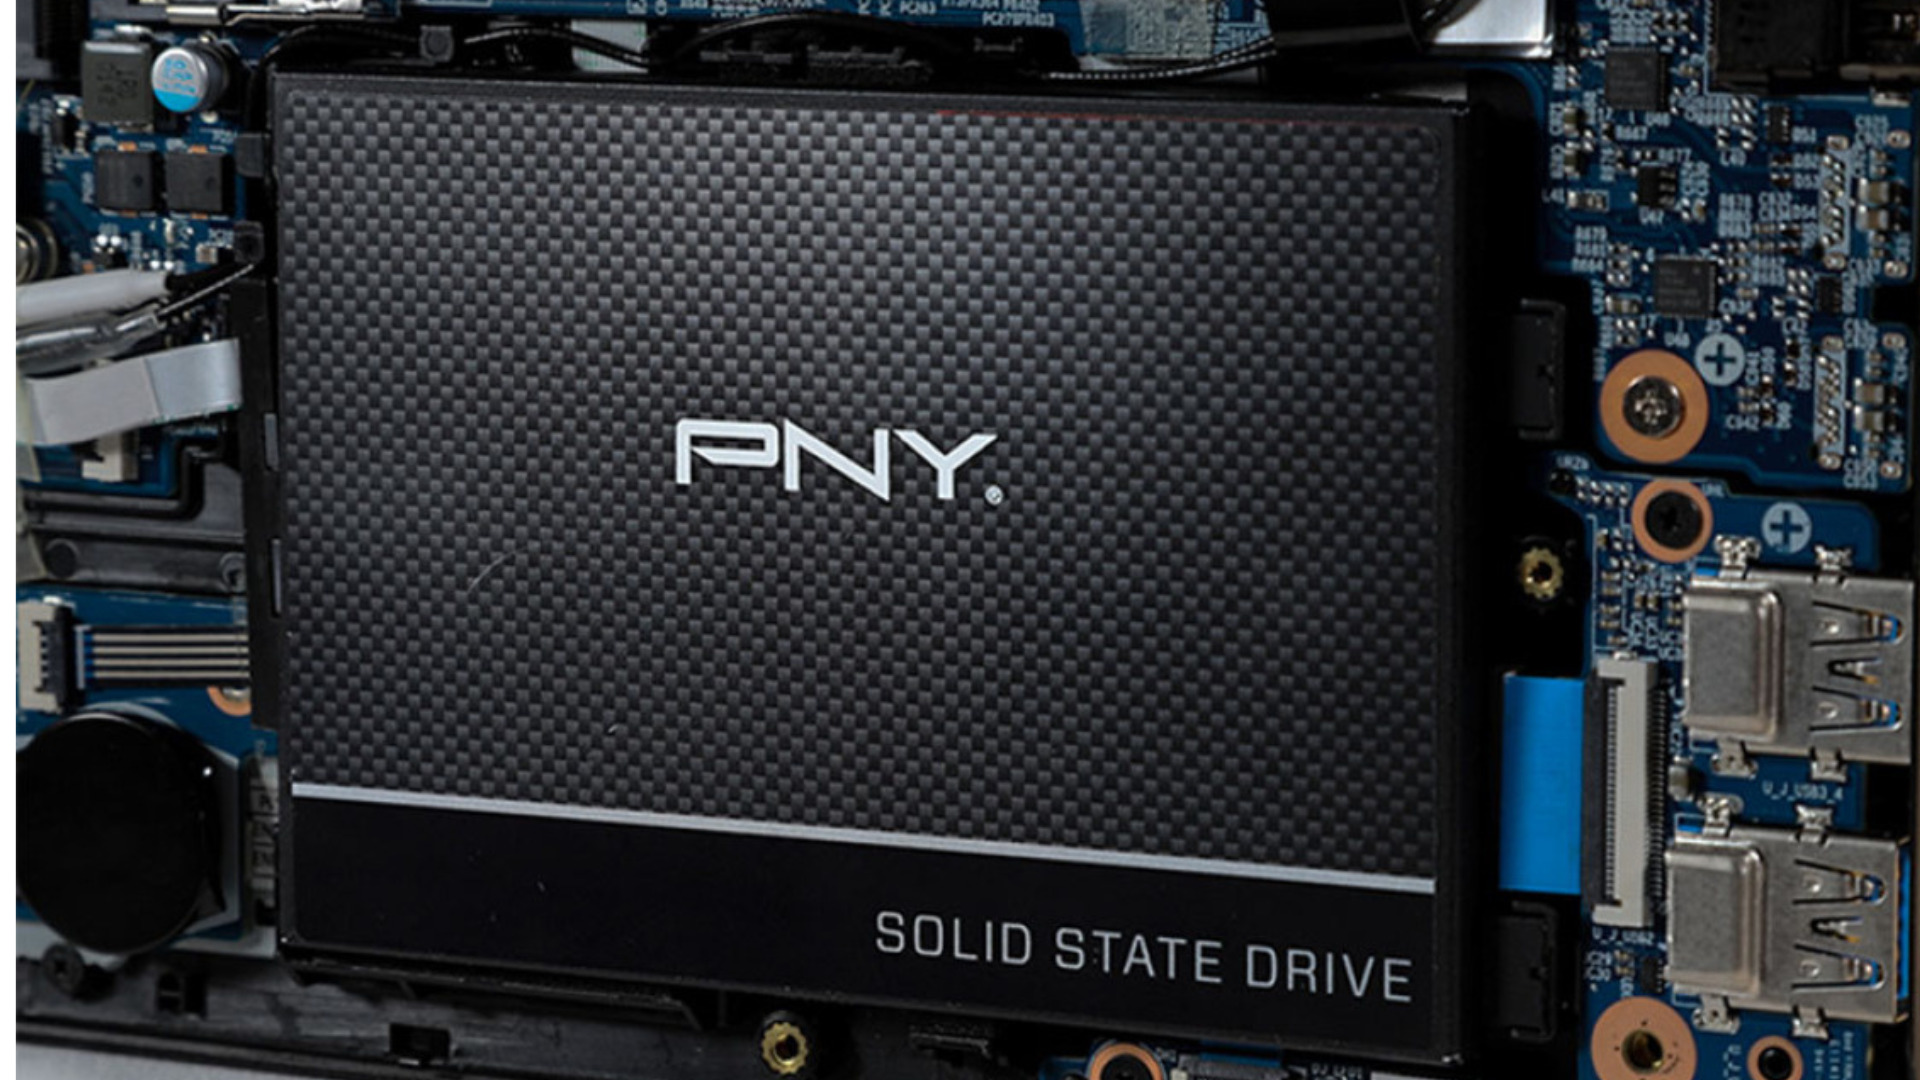 PNY CS900 SSD Interne SATA III Disque SSD, 2.5 pouces, 1To